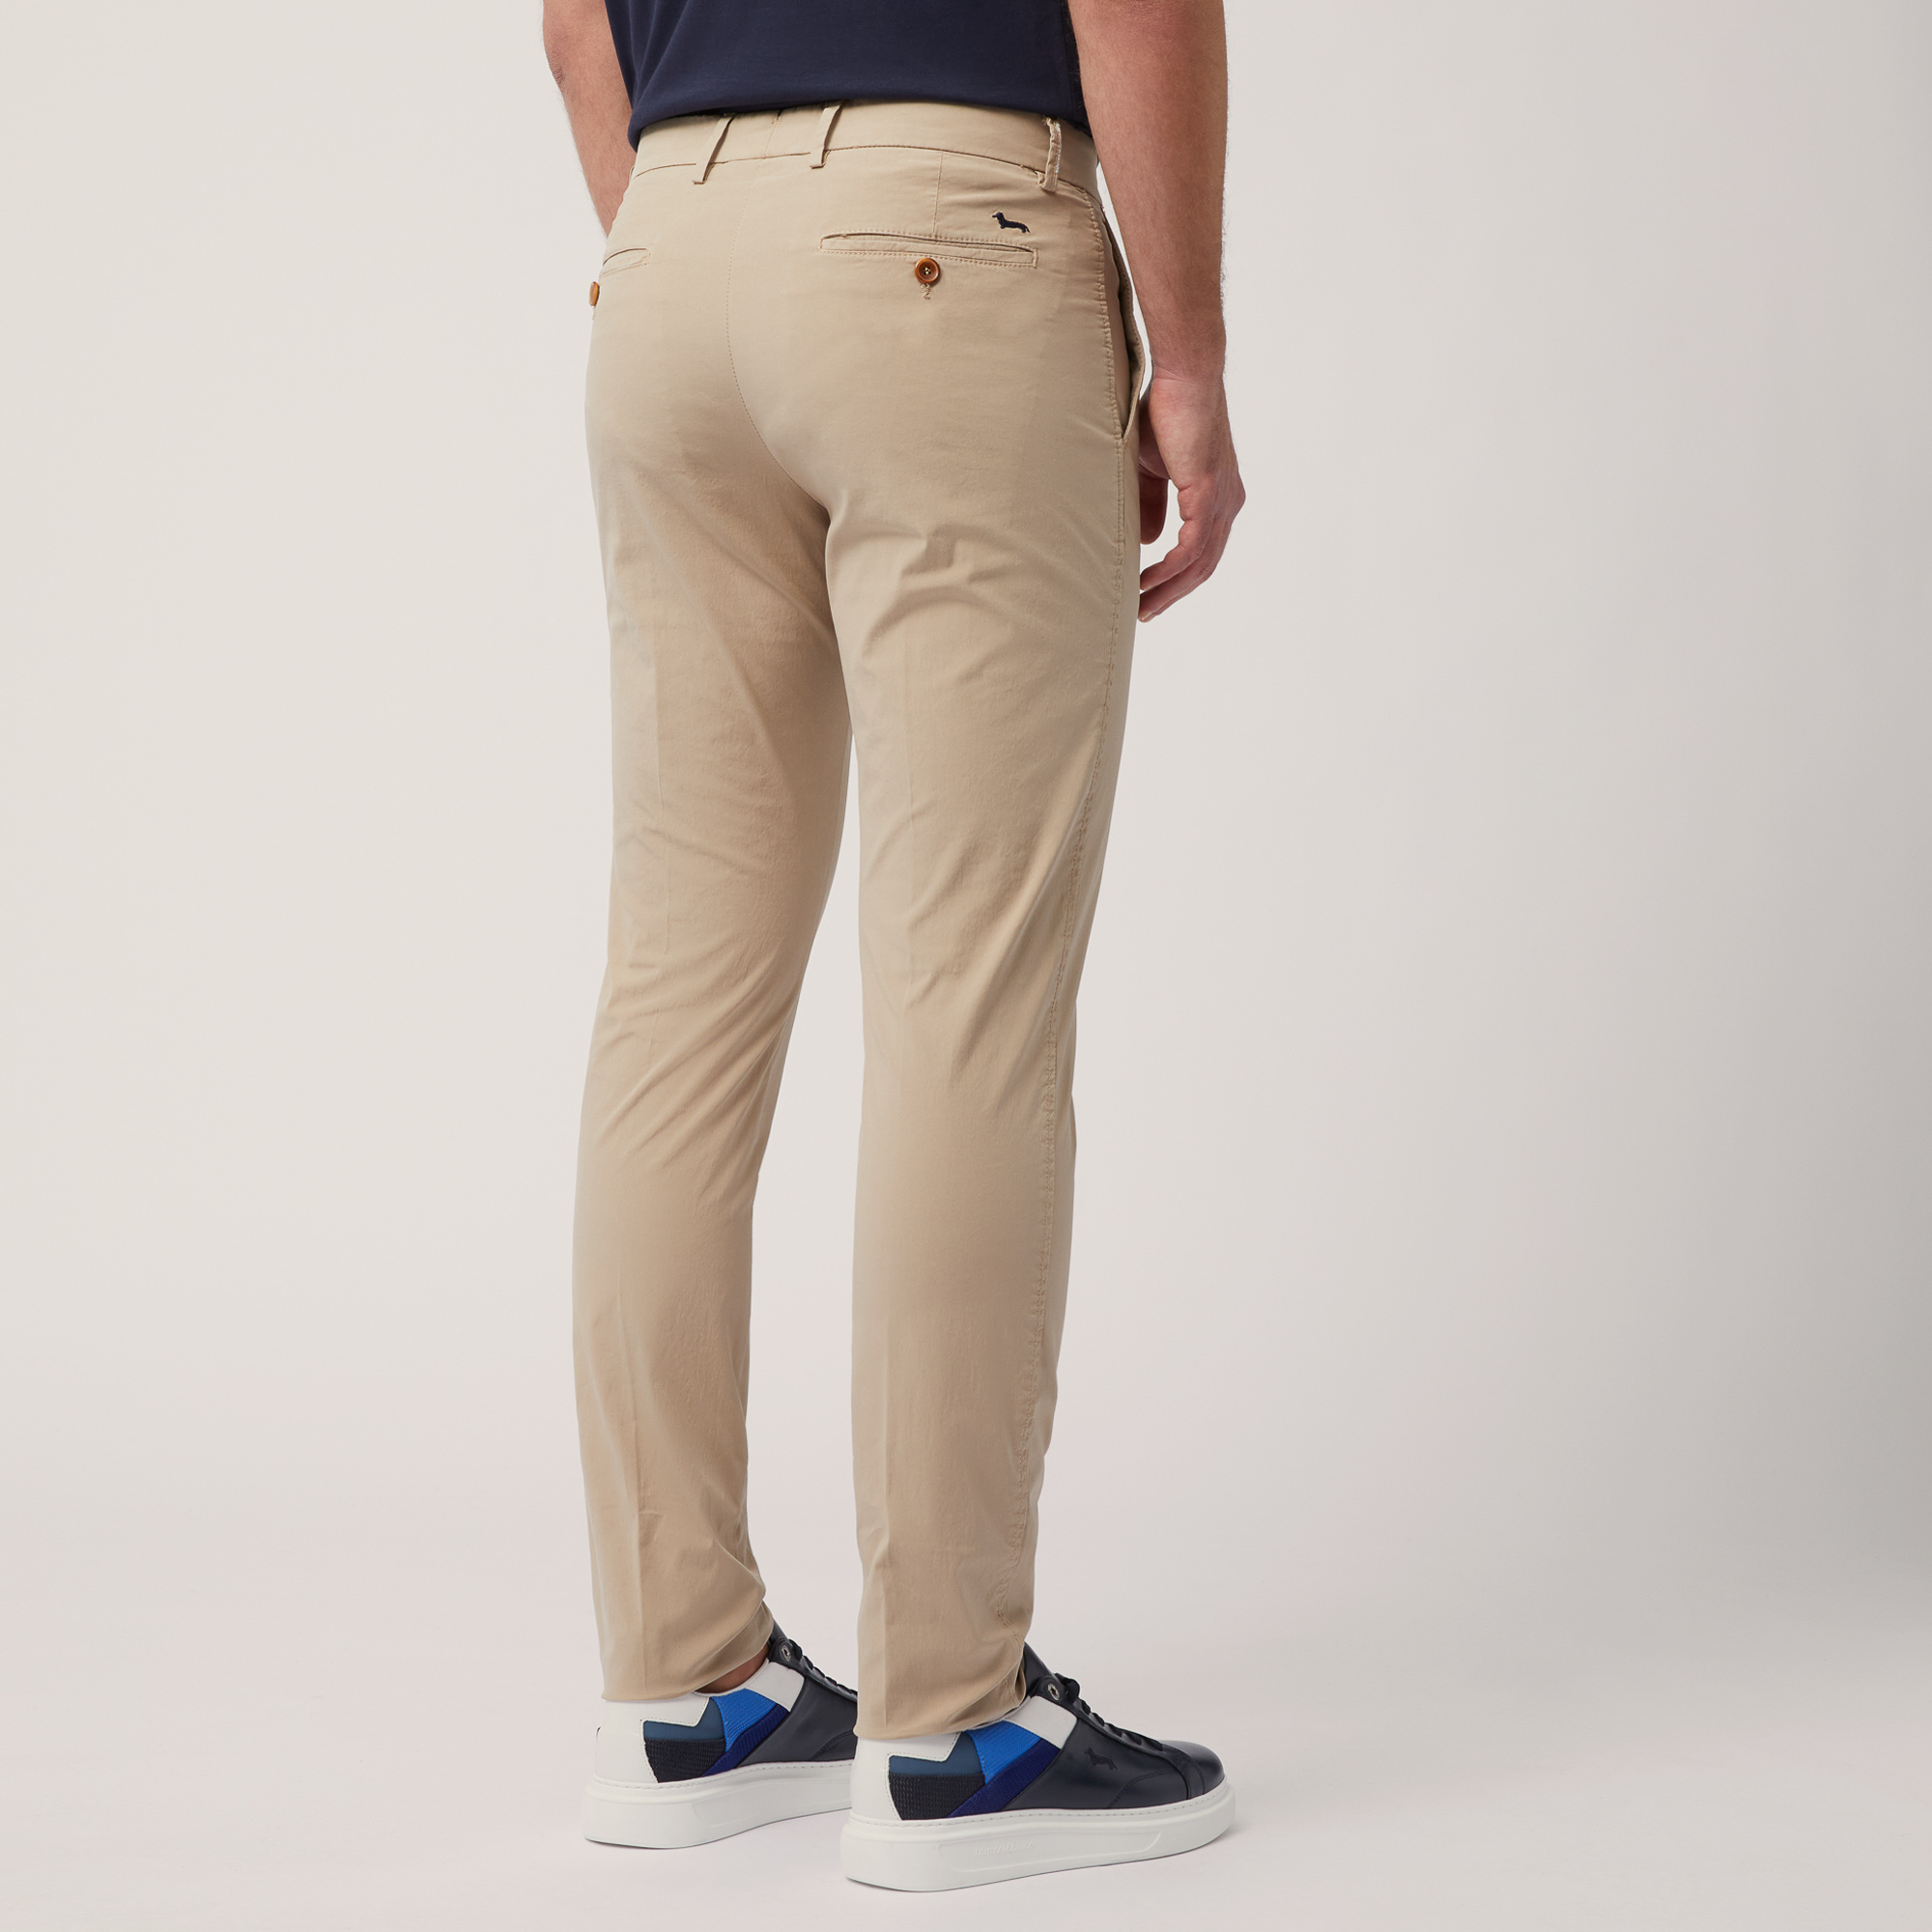 Chino-Hose Narrow Fit, Gelb, large image number 1